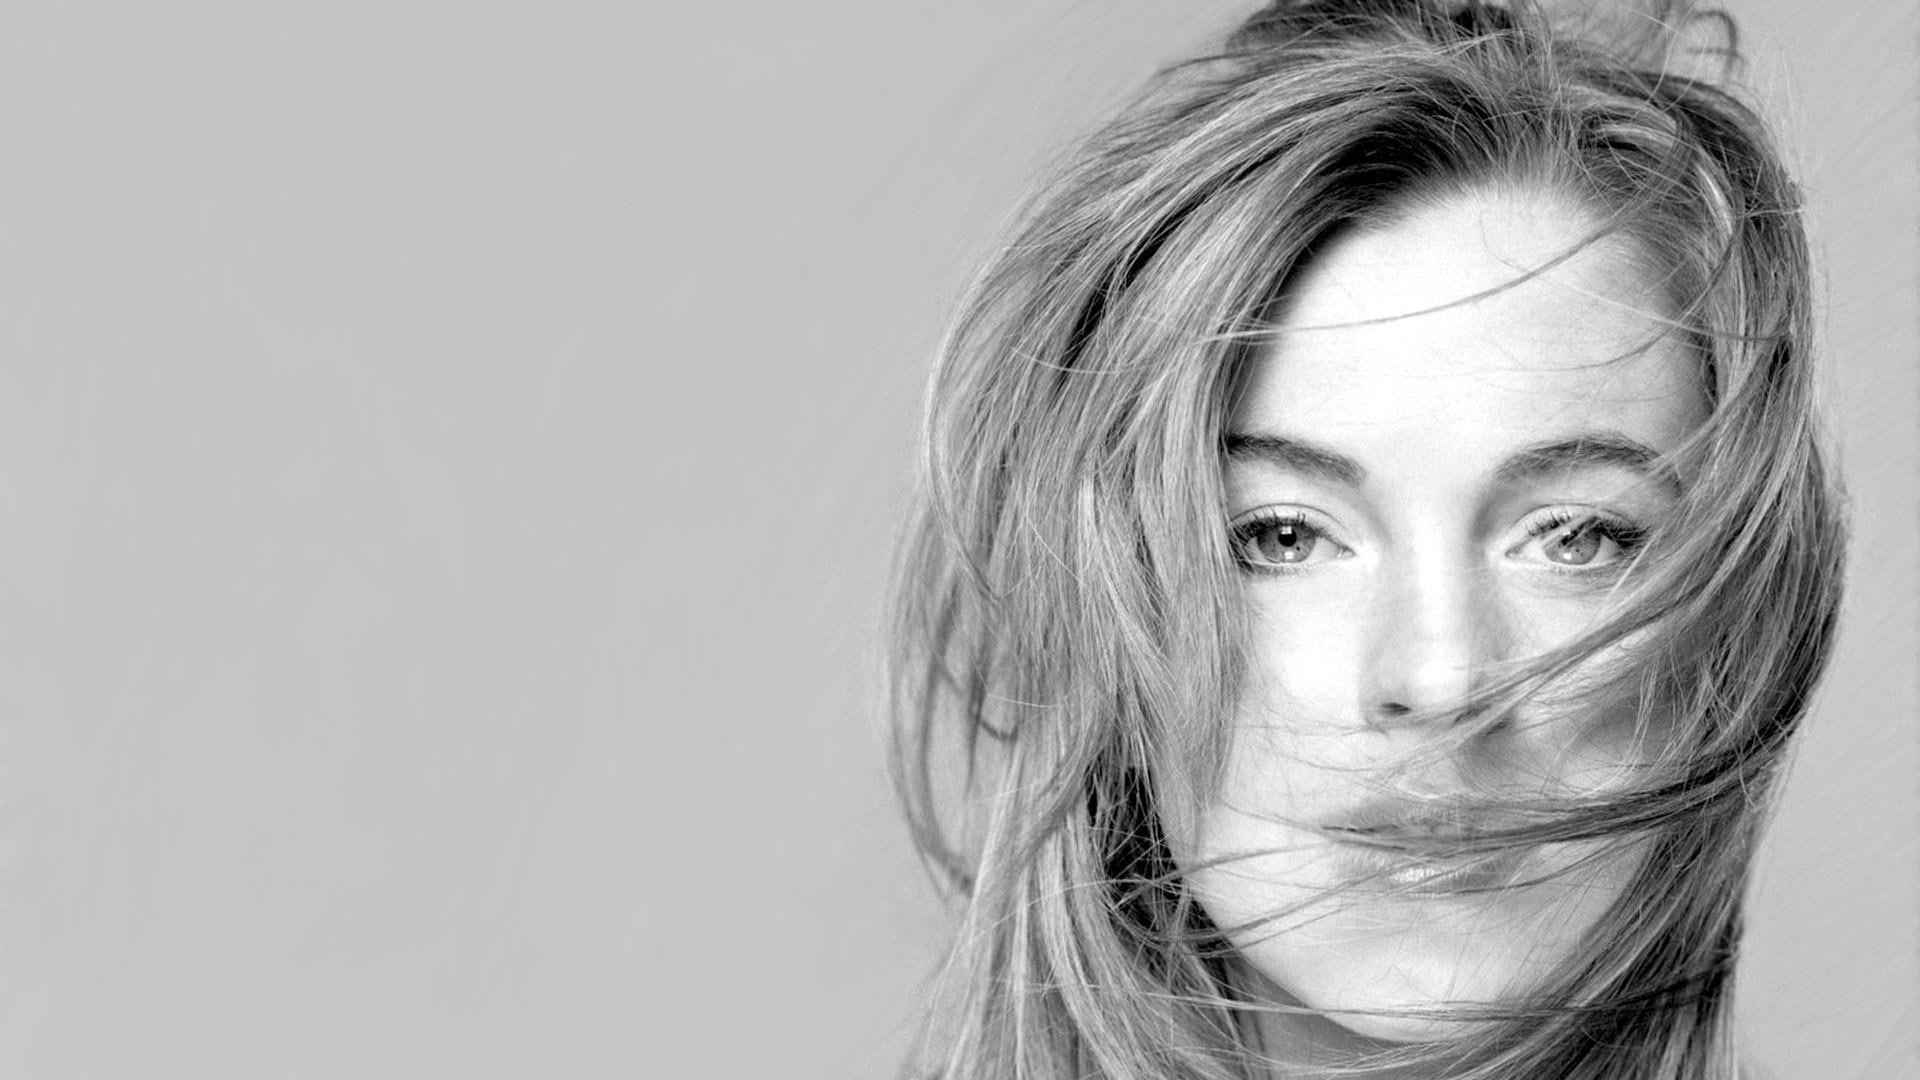 Lindsay Lohan Images, woman's face, celebrity, celebrities, hollywood